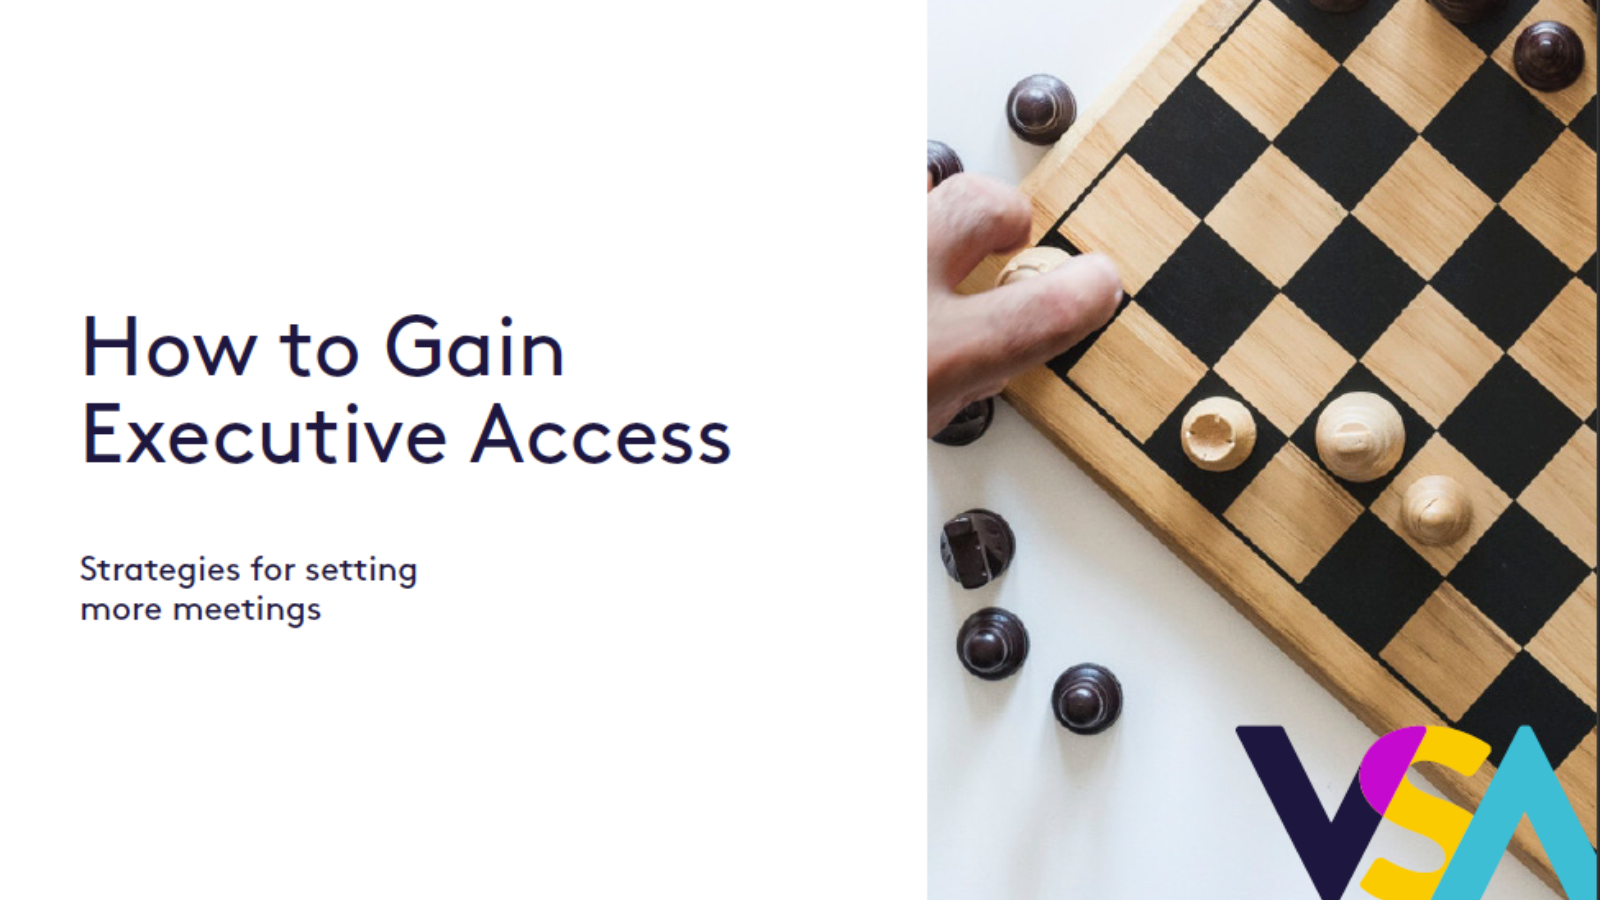 ebook cover with chess board on how salespeople can gain executive access